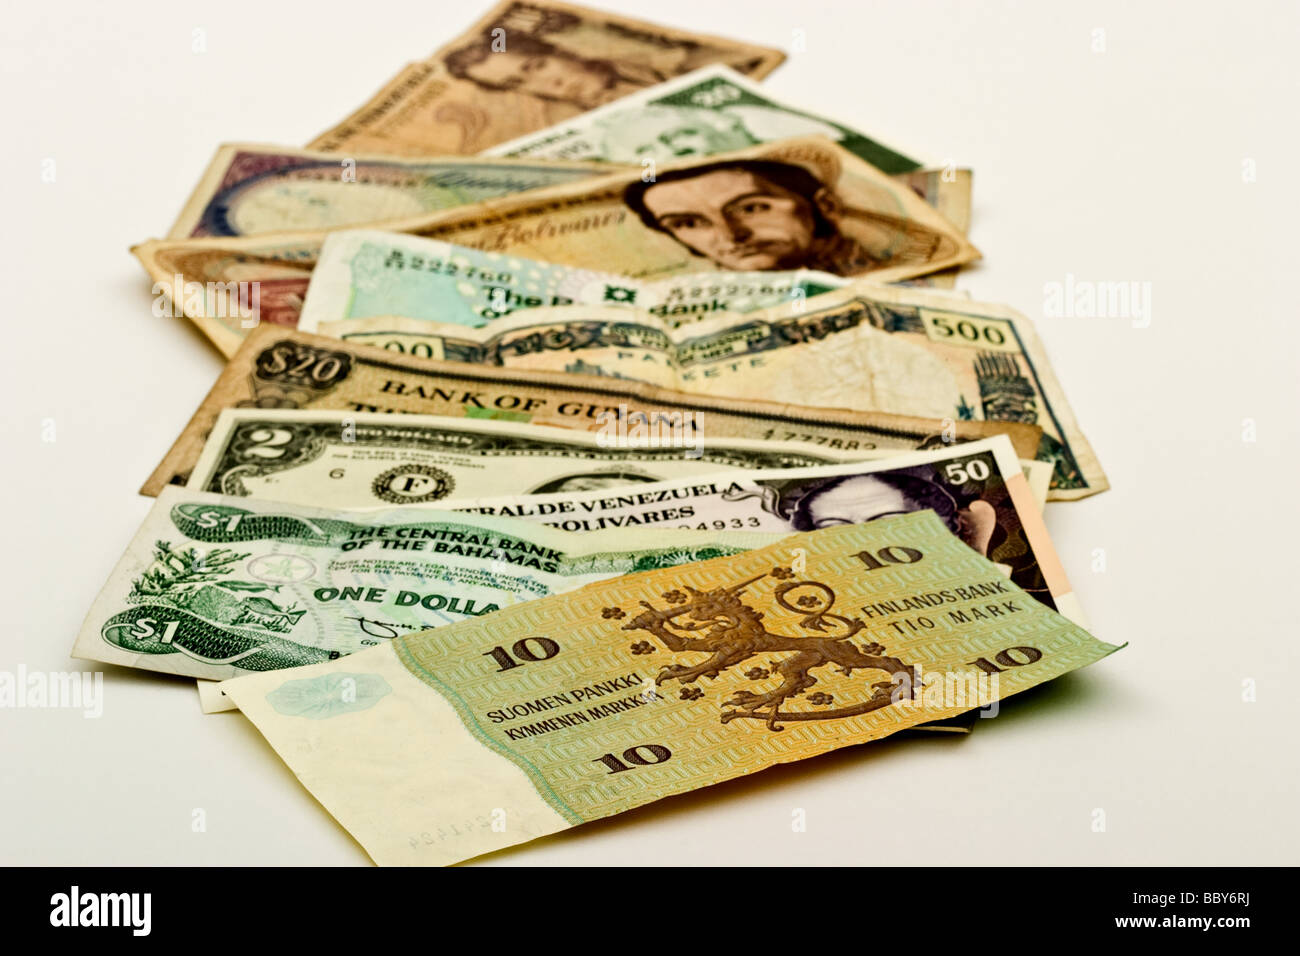 Money currencies from a variety of countries around the world. Stock Photo